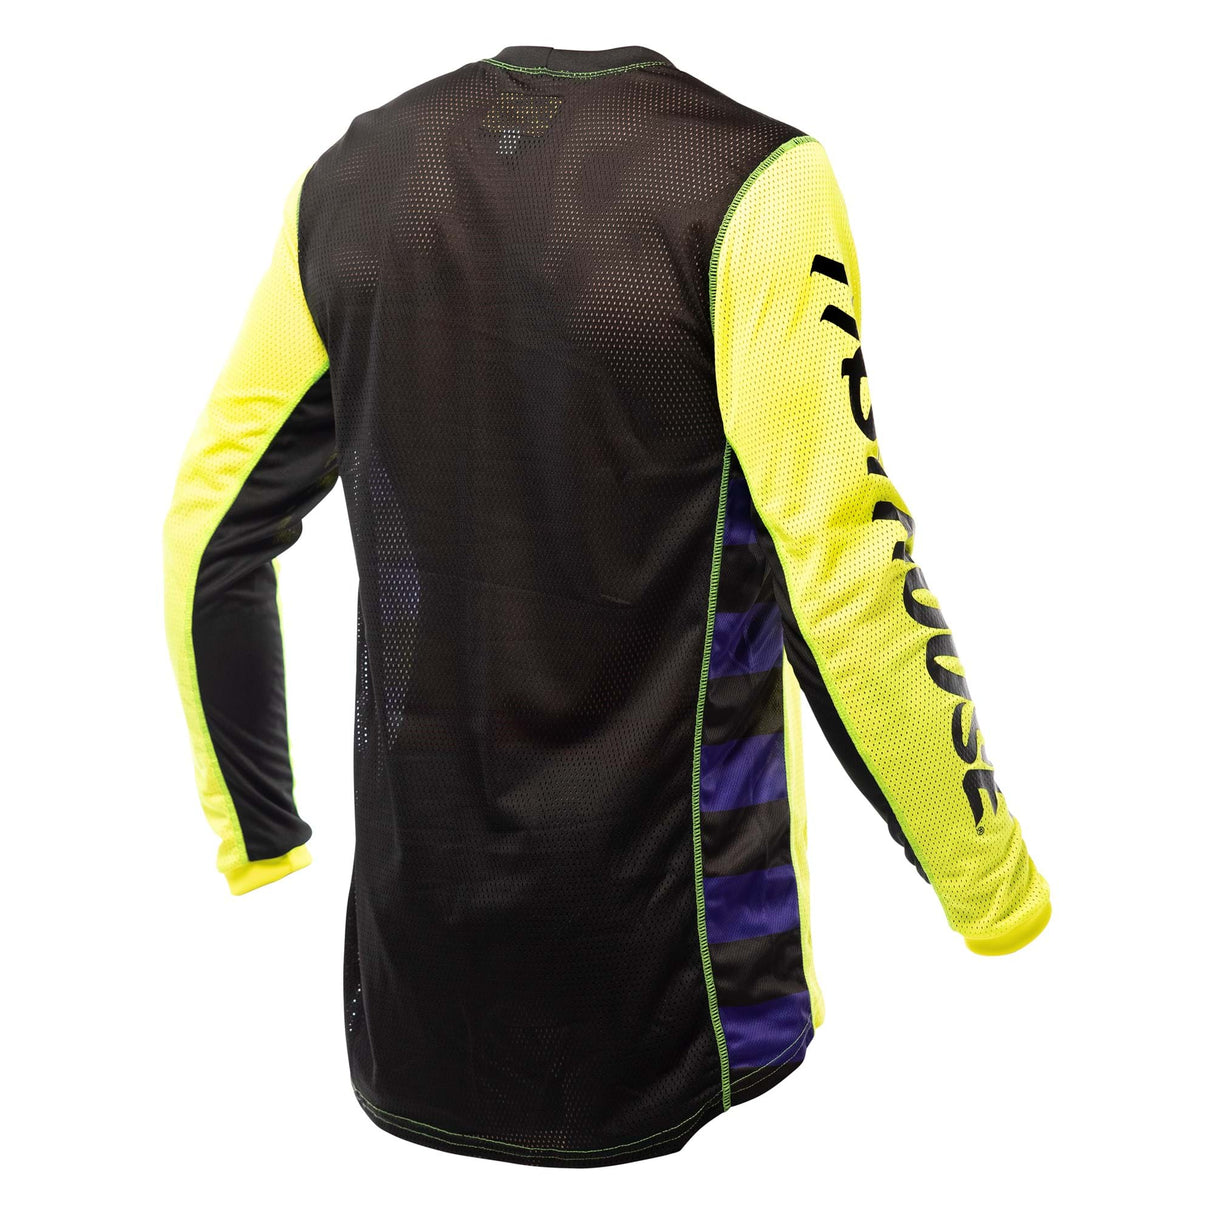 Fasthouse Original Air Cooled Long Sleeve Jersey